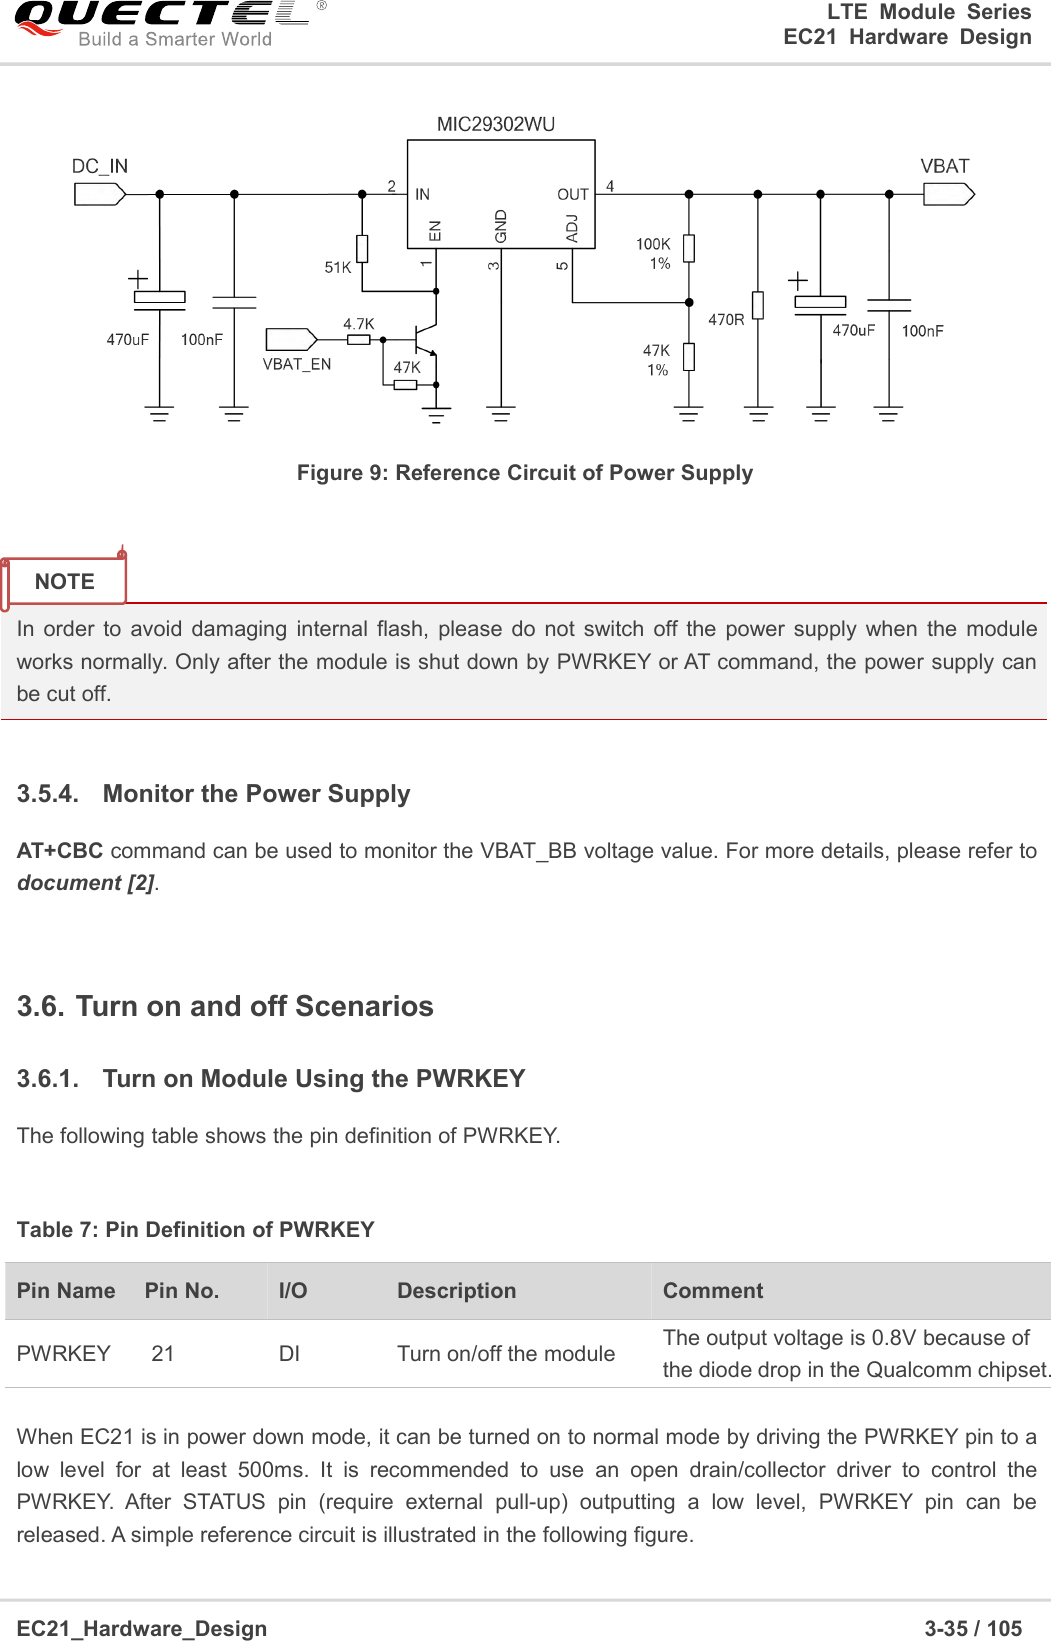 LTE Module SeriesEC21 Hardware DesignEC21_Hardware_Design 3-35 / 105Figure 9: Reference Circuit of Power SupplyIn order to avoid damaging internal flash, please do not switch off the power supply when the moduleworks normally. Only after the module is shut down by PWRKEY or AT command, the power supply canbe cut off.3.5.4. Monitor the Power SupplyAT+CBC command can be used to monitor the VBAT_BB voltage value. For more details, please refer todocument [2].3.6. Turn on and off Scenarios3.6.1. Turn on Module Using the PWRKEYThe following table shows the pin definition of PWRKEY.Table 7: Pin Definition of PWRKEYPin NamePin No.I/ODescriptionCommentPWRKEY21DITurn on/off the moduleThe output voltage is 0.8V because ofthe diode drop in the Qualcomm chipset.When EC21 is in power down mode, it can be turned on to normal mode by driving the PWRKEY pin to alow level for at least 500ms. It is recommended to use an open drain/collector driver to control thePWRKEY. After STATUS pin (require external pull-up) outputting a low level, PWRKEY pin can bereleased. A simple reference circuit is illustrated in the following figure.NOTE